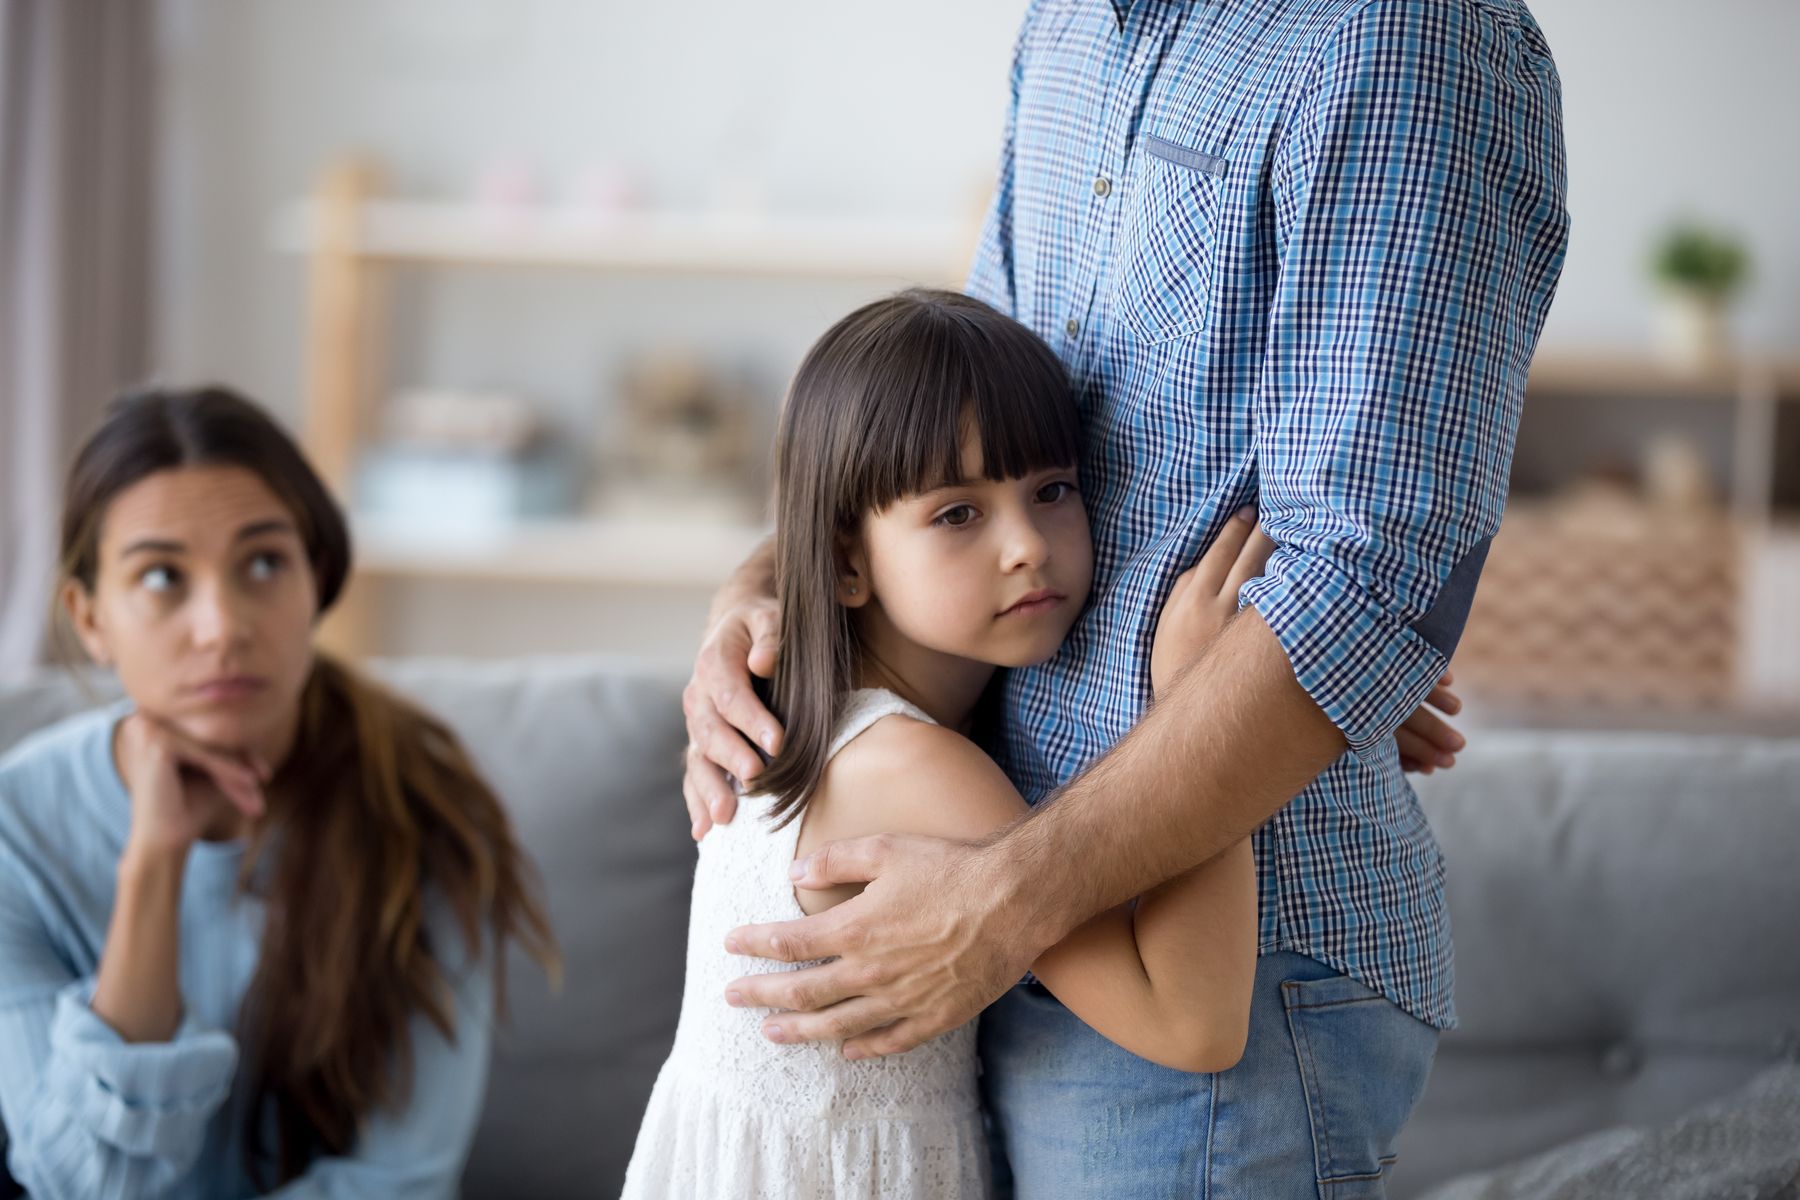 North Carolina Custody Laws for Unmarried Parents